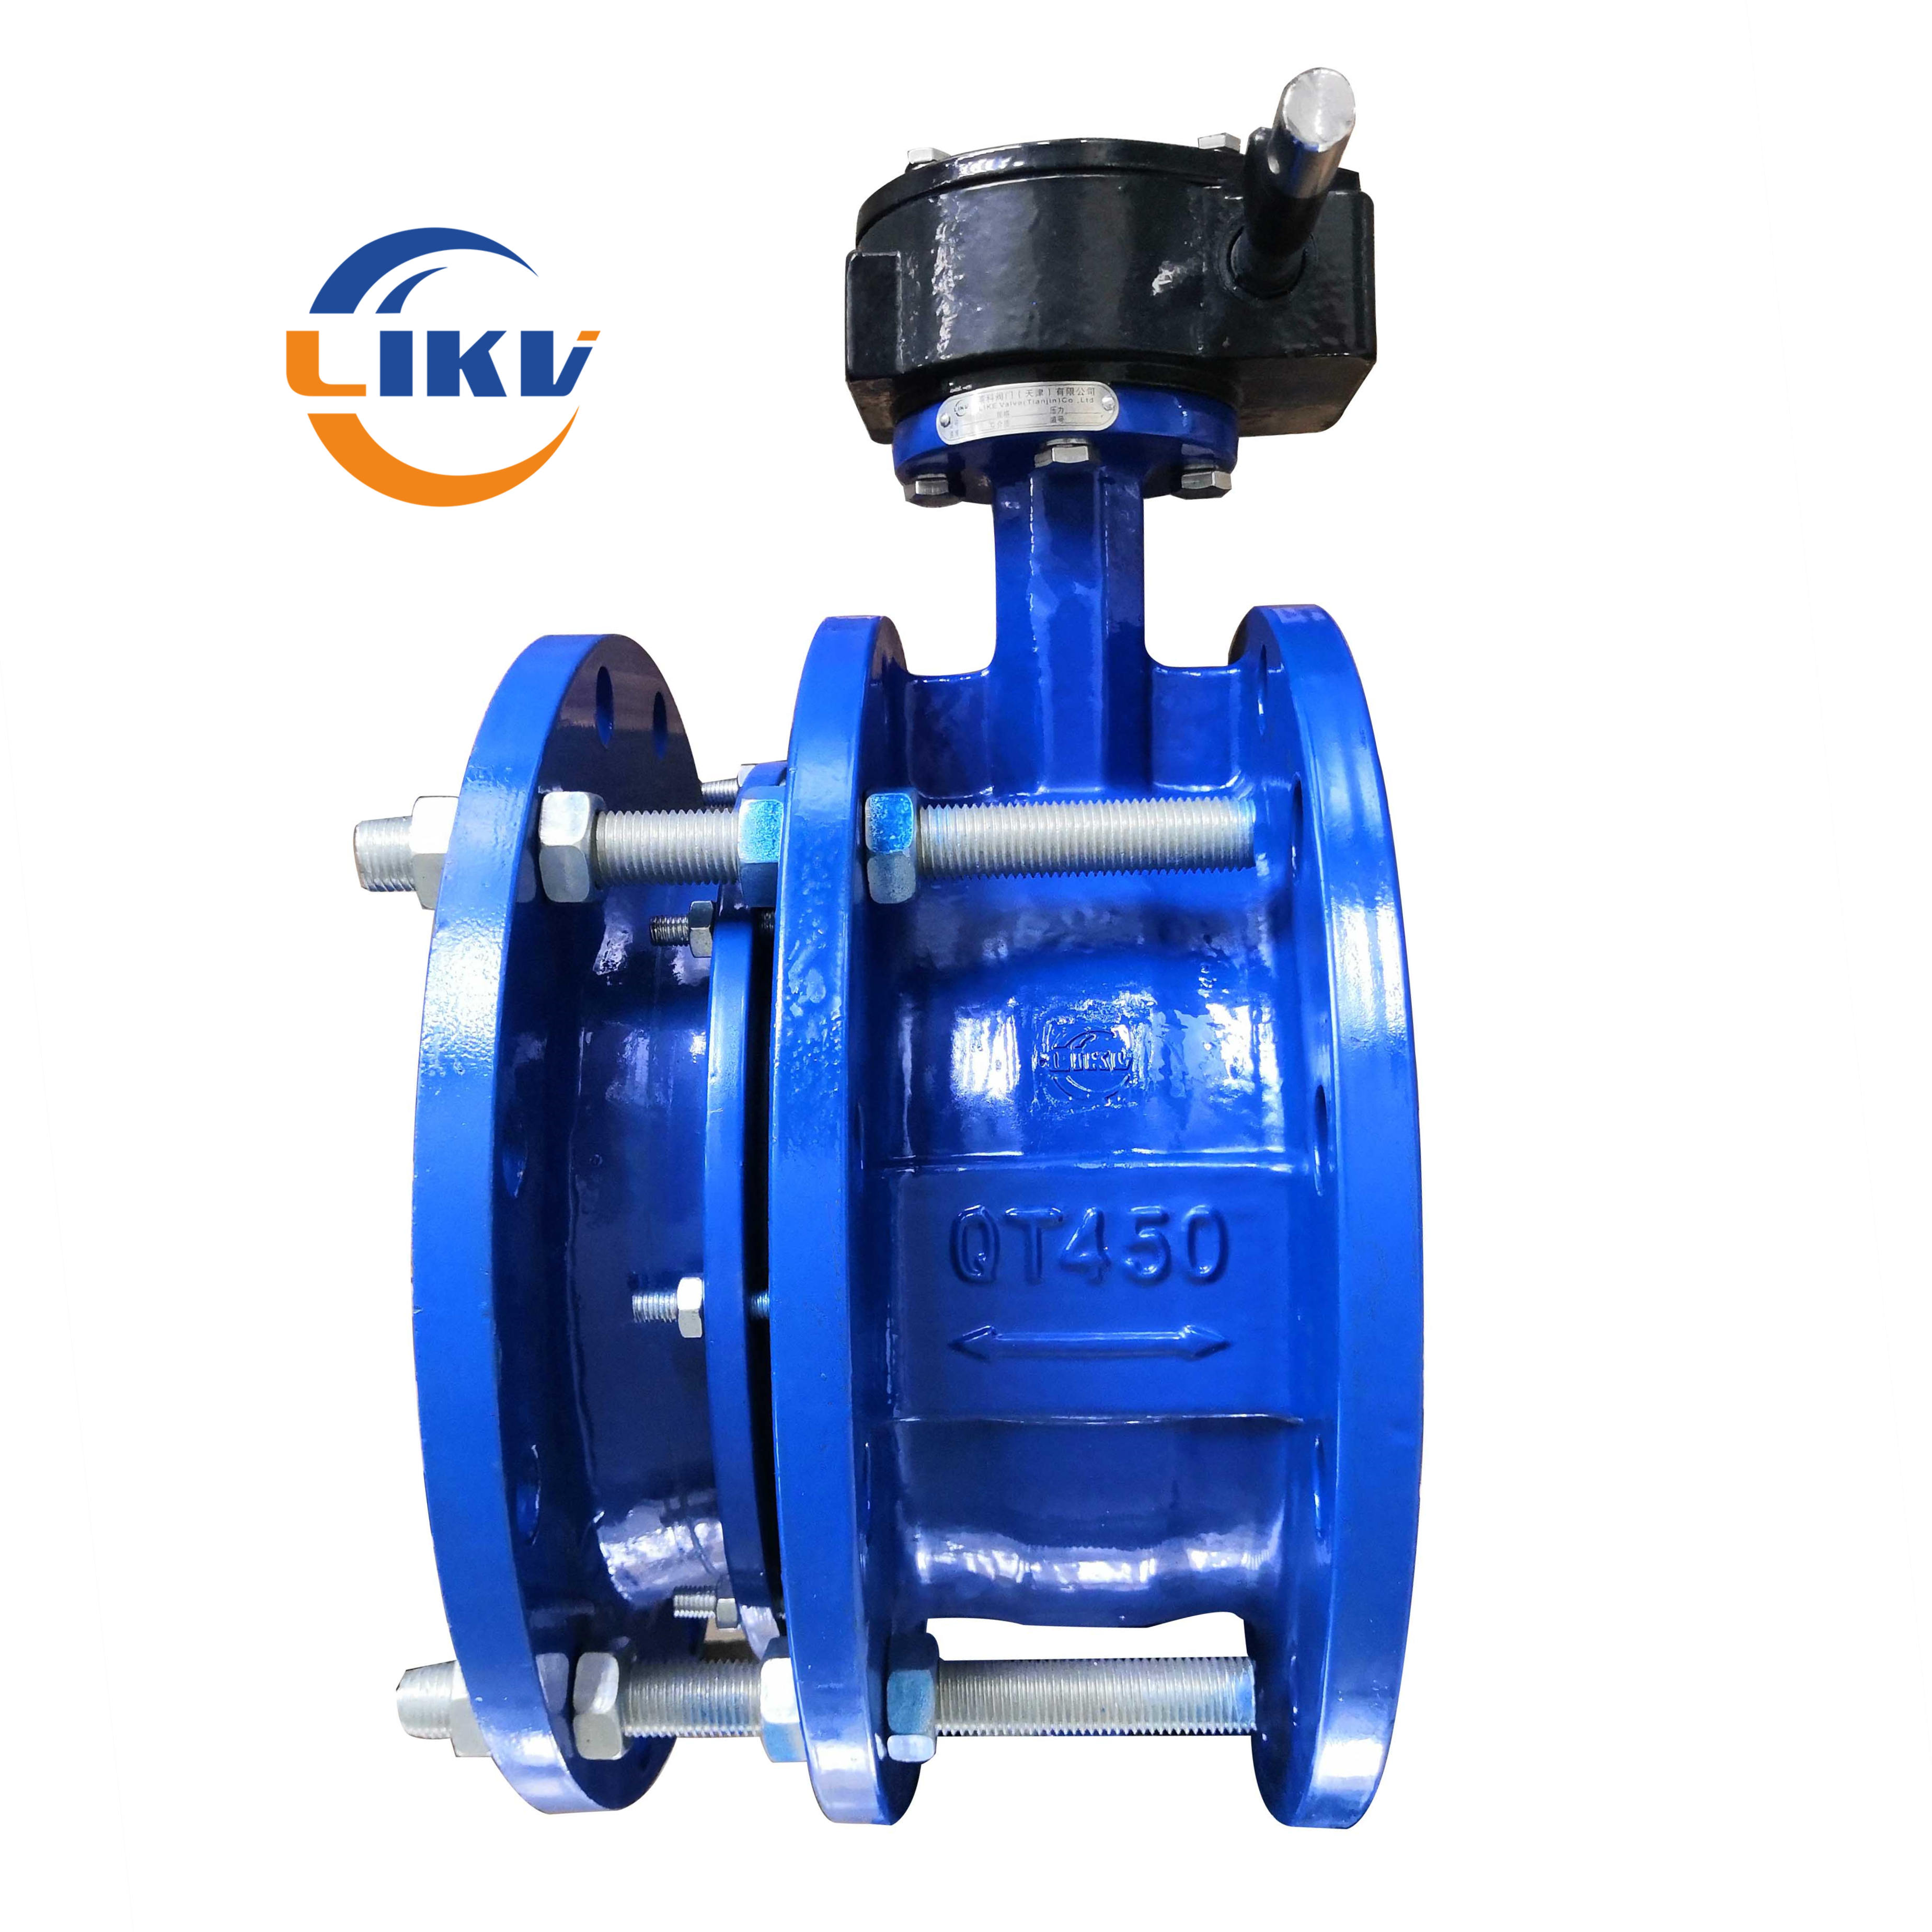 Flange Worm Gear Butterfly Valve with Flexible Expansion Joint Featured Image